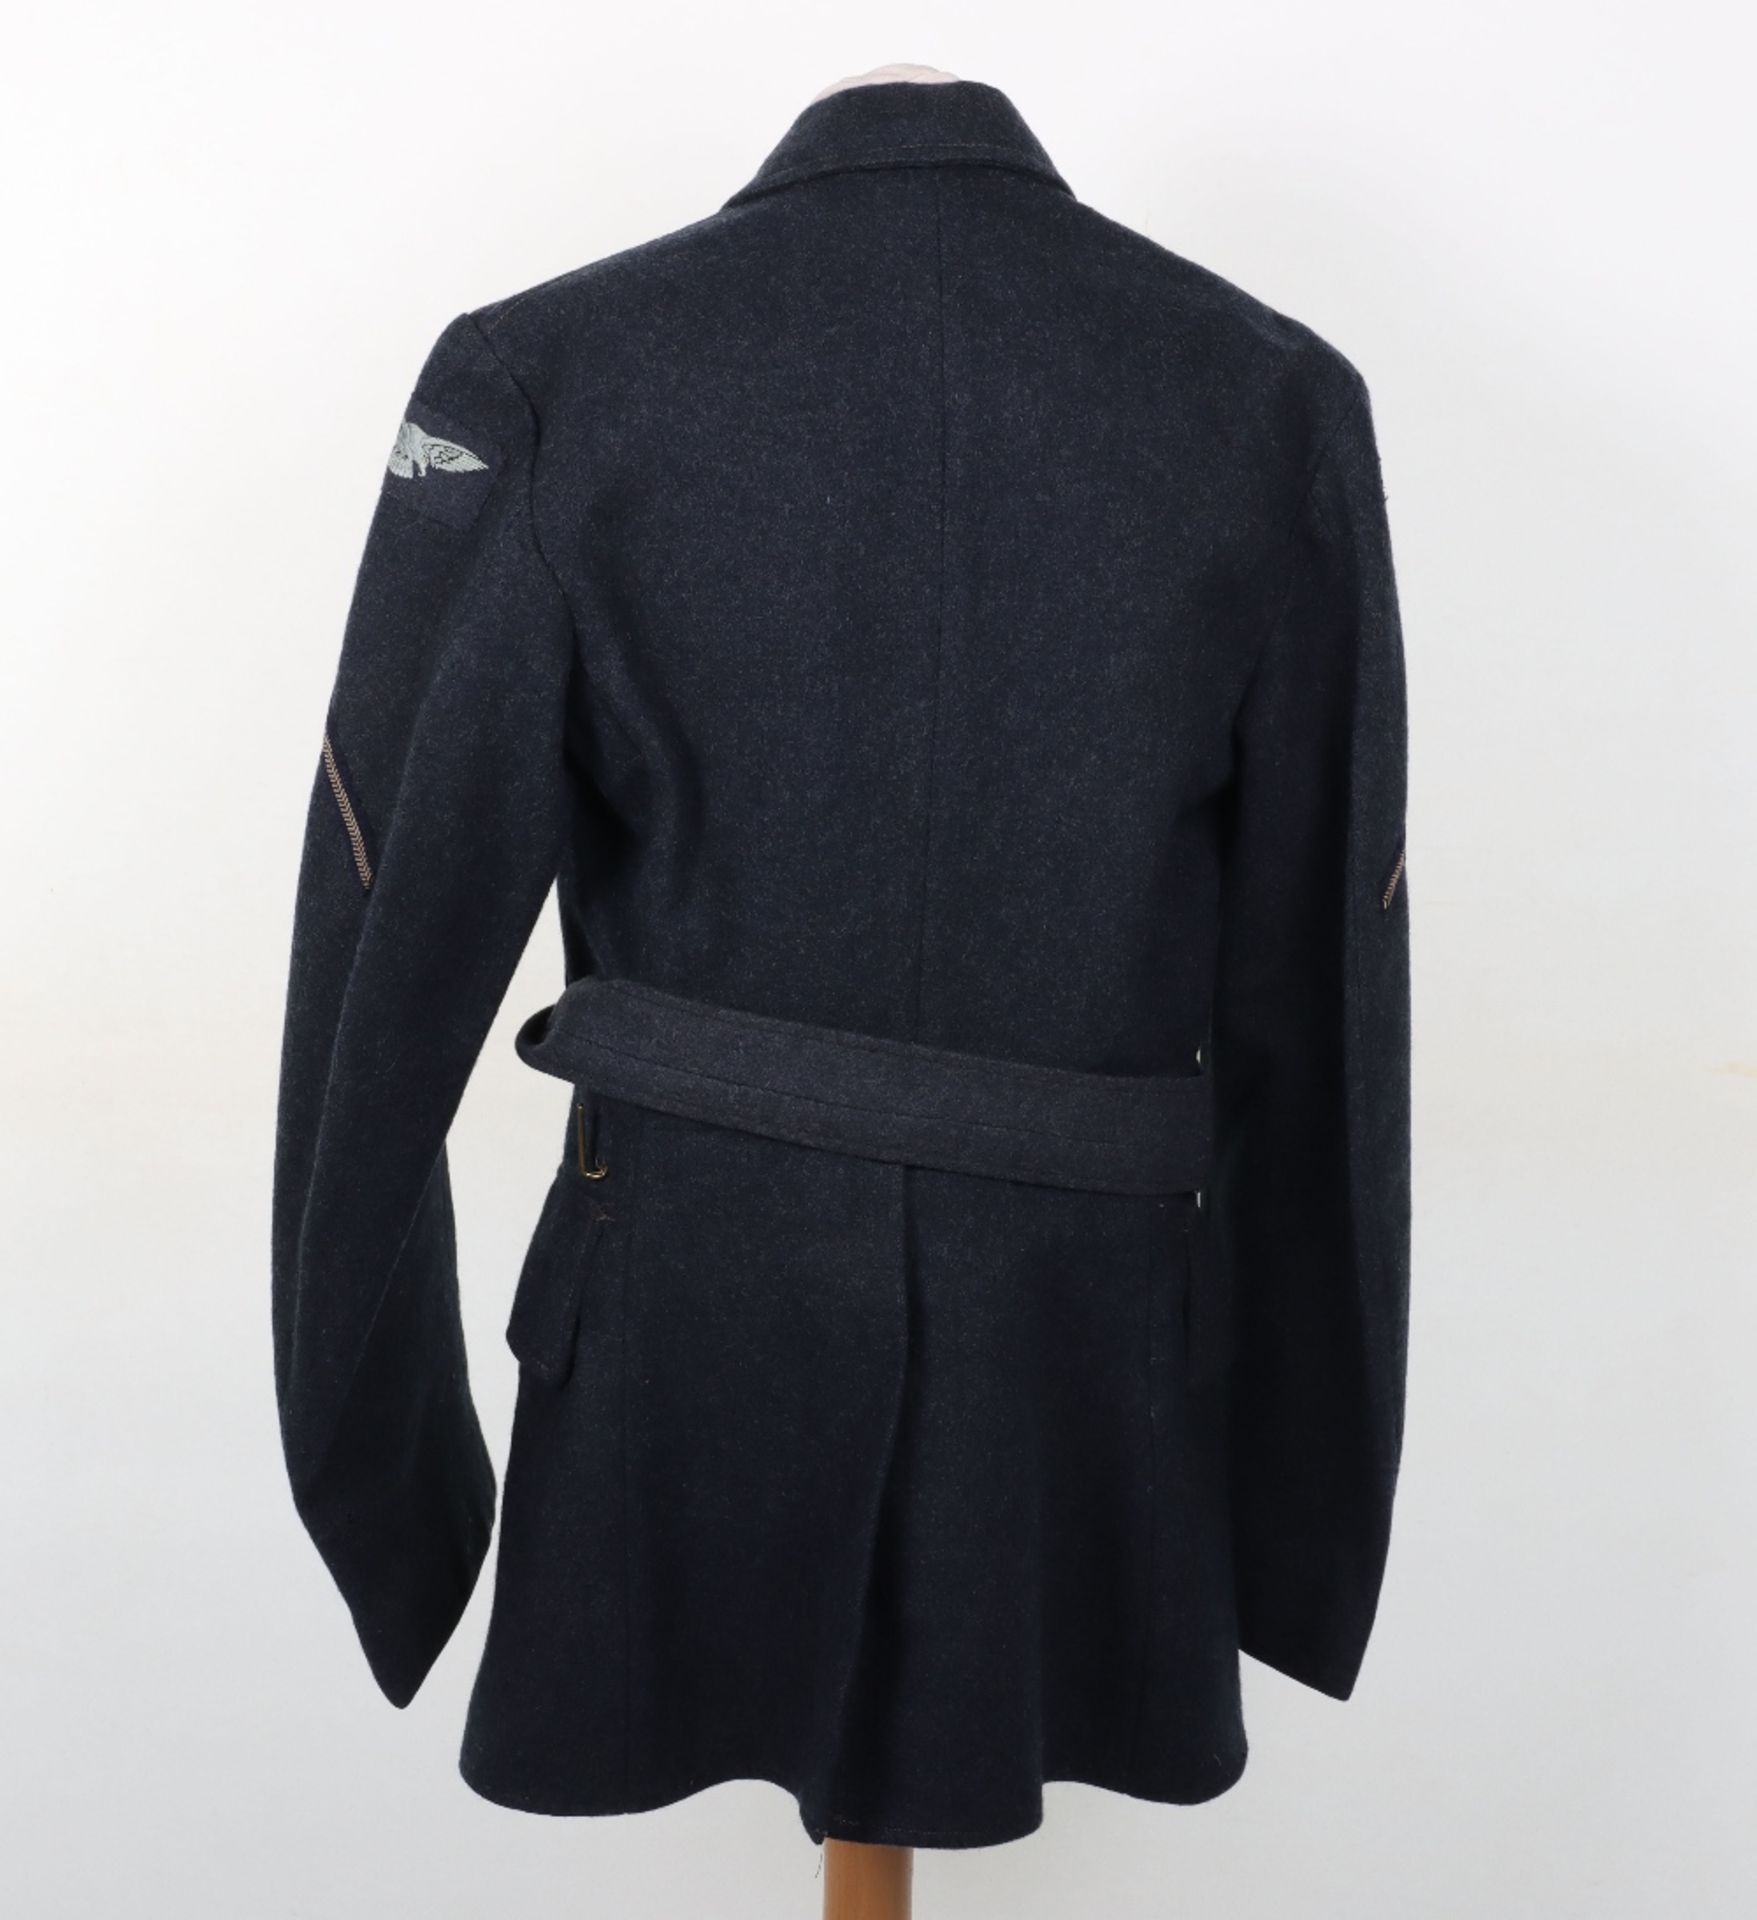 Royal Air Force Service Dress Tunic - Image 7 of 10